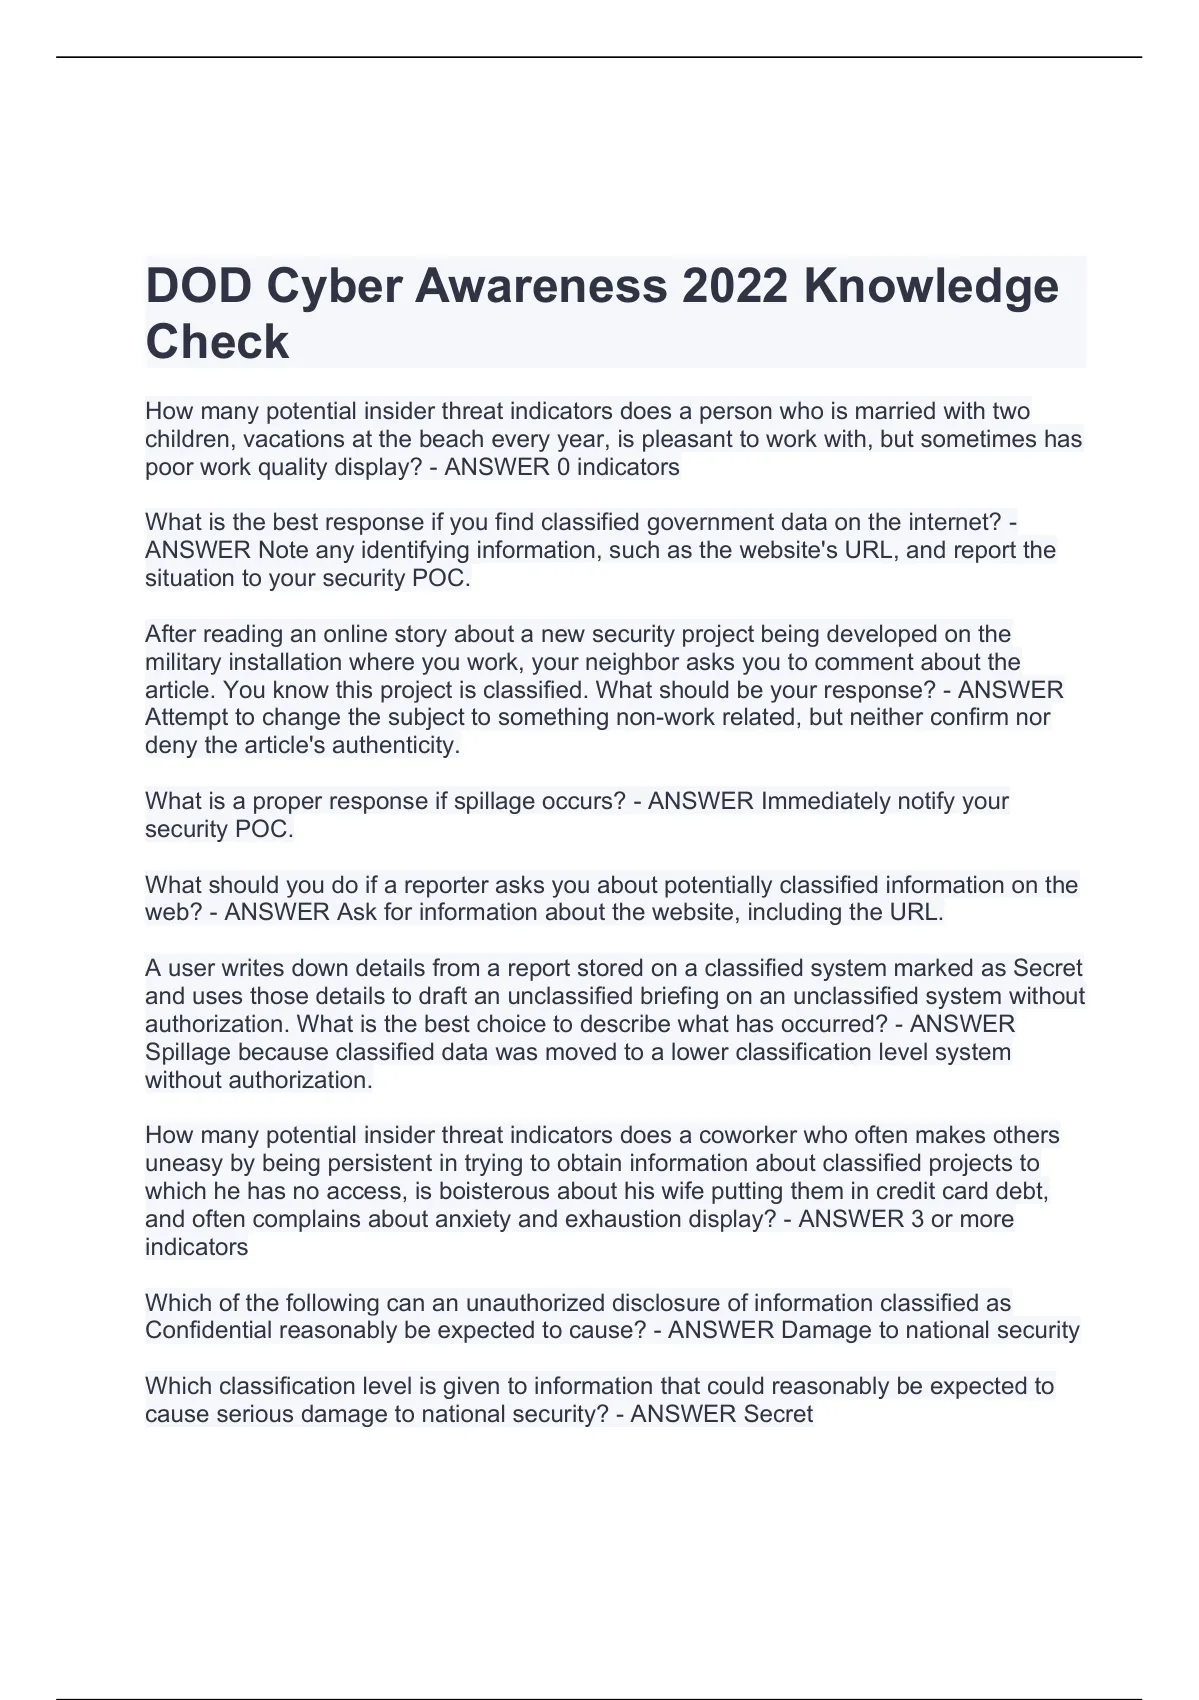 DOD Cyber Awareness 2022 Knowledge Check DOD Cyber Awareness 2022